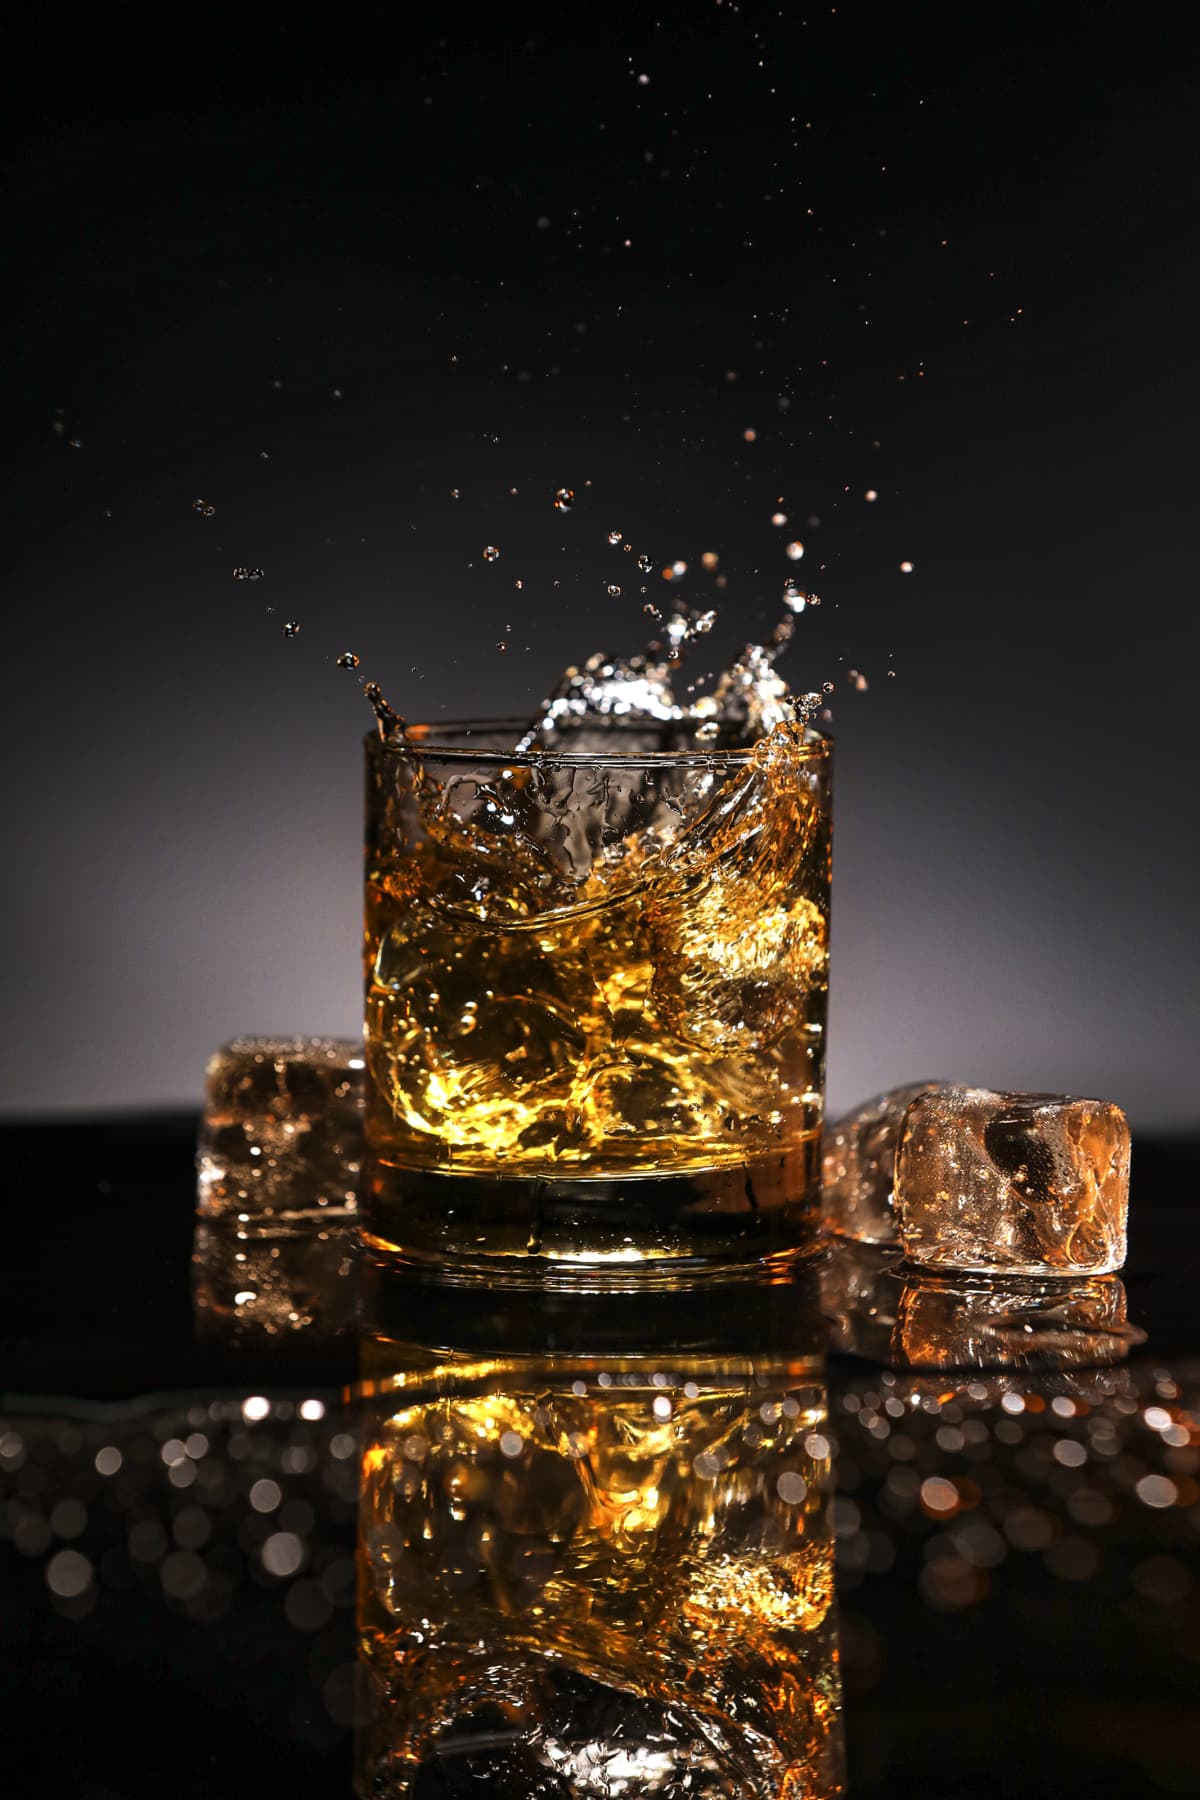 A glass of whisky with ice spilling on a dark background.